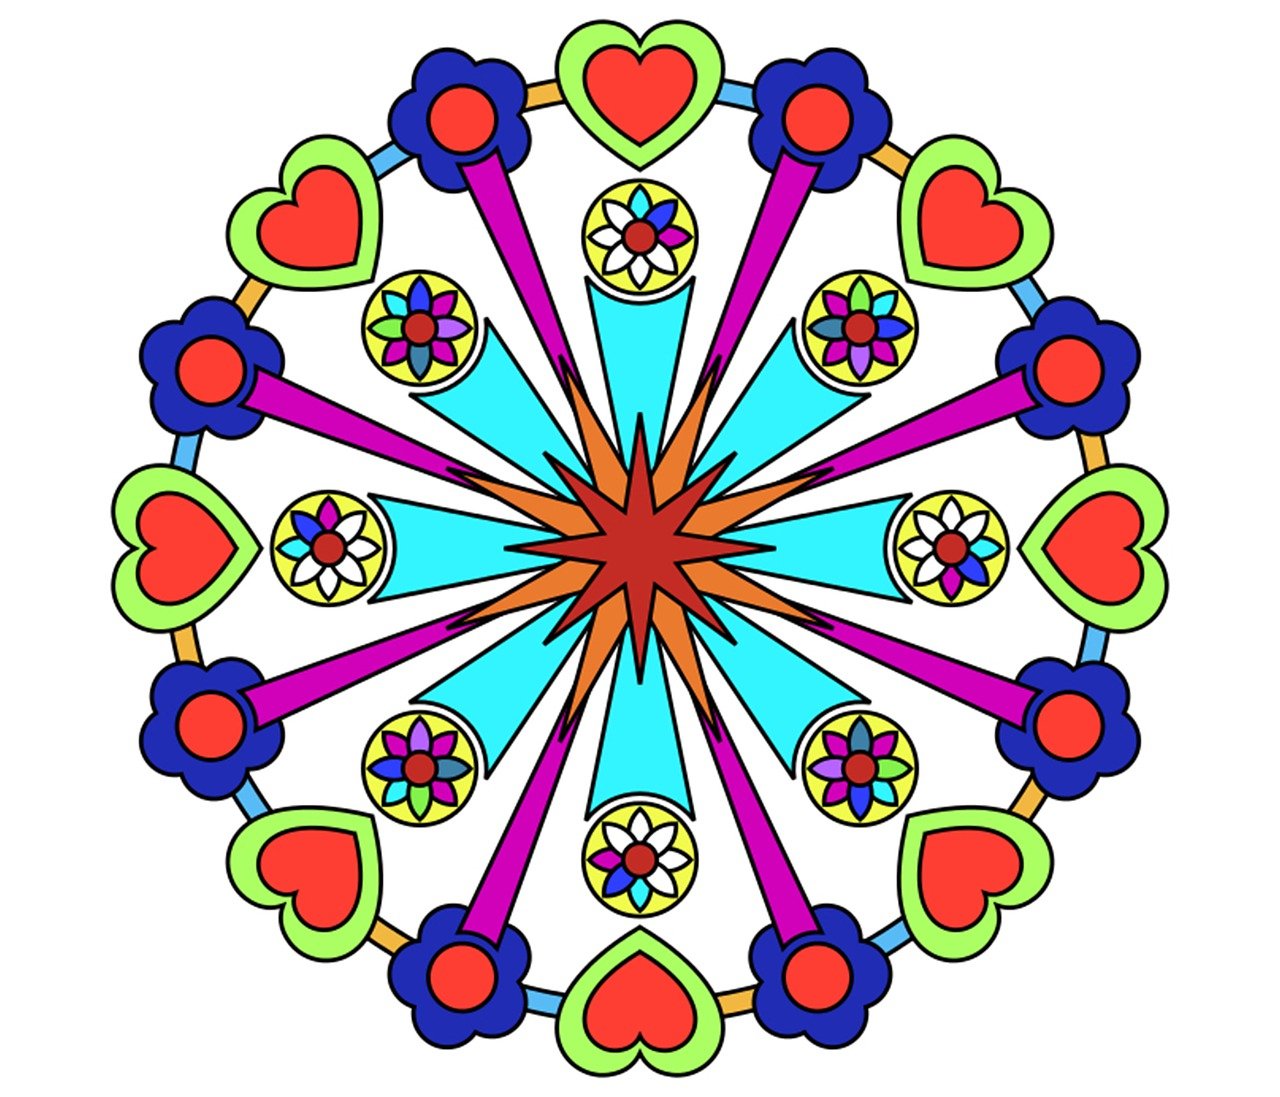 a drawing of hearts arranged in a circle, a digital rendering, inspired by Kagaku Murakami, psychedelic art, no gradients, color page, wheel, happy!!!